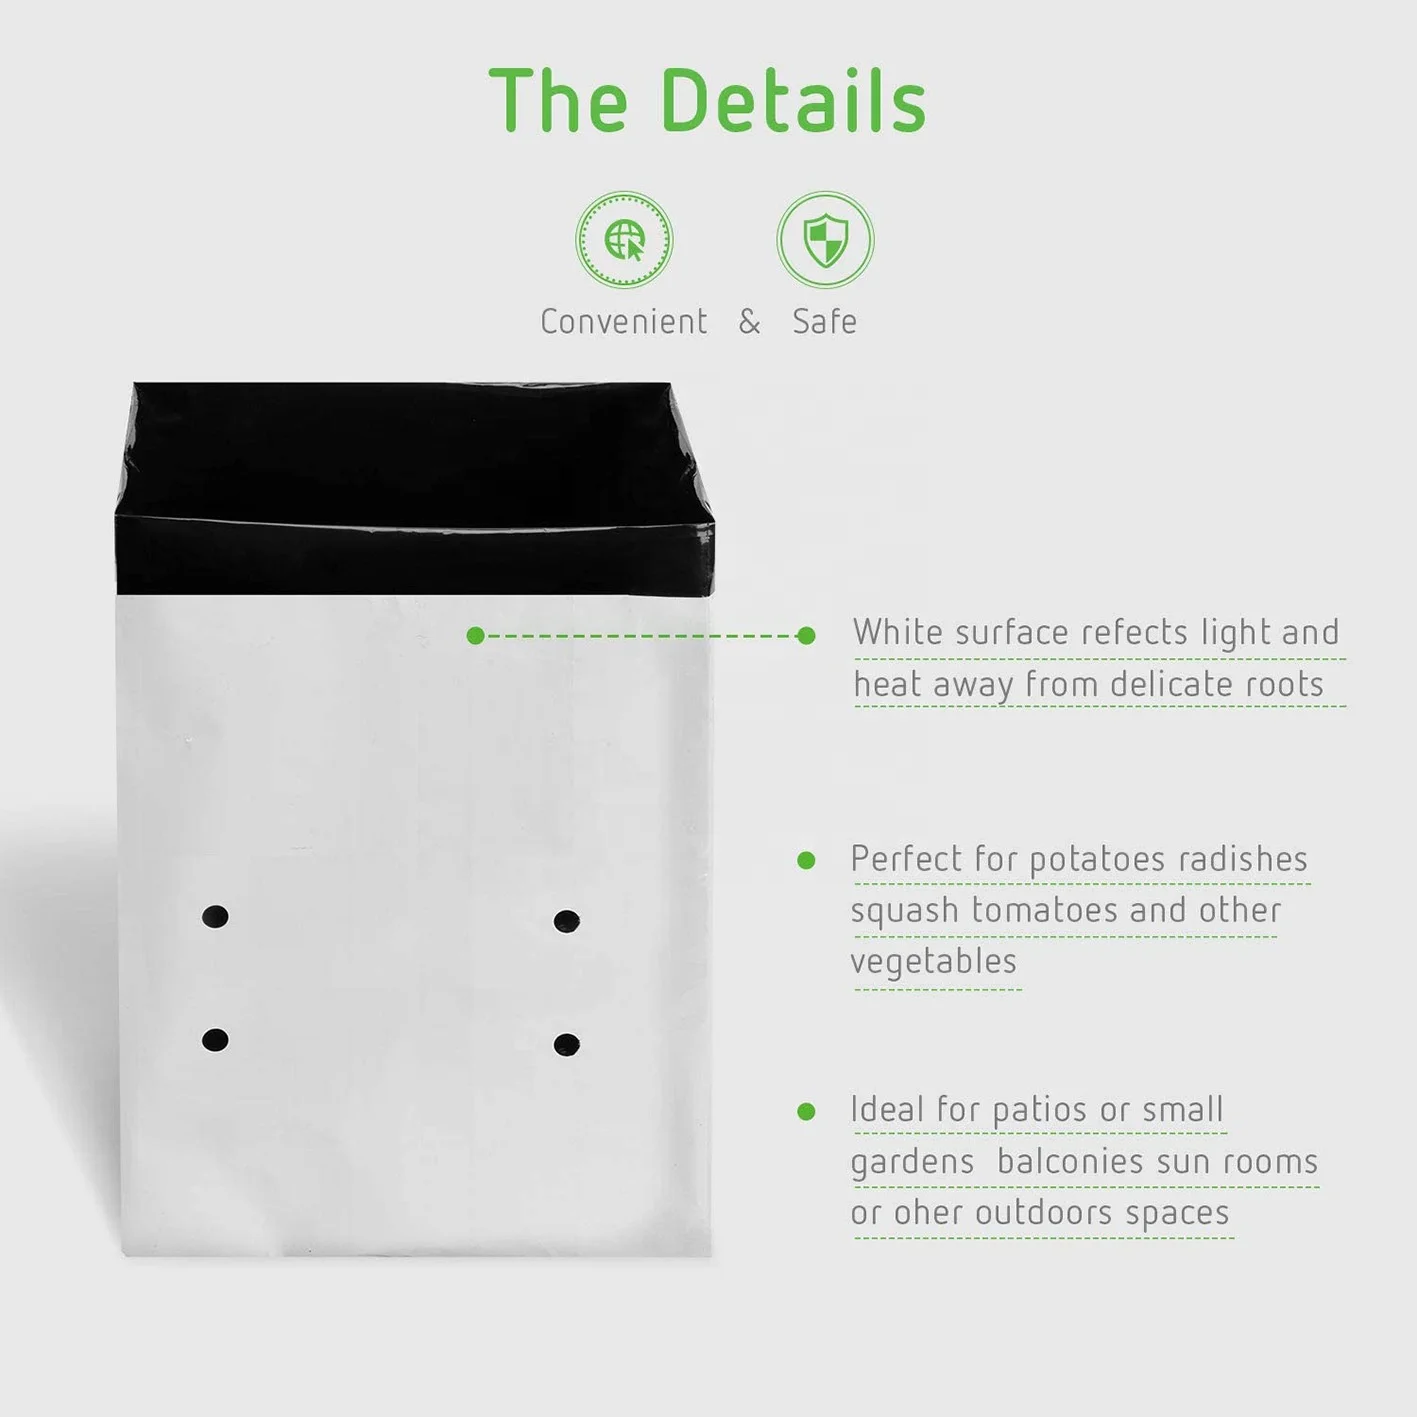 Black and White plastic plant grow bag for Potting Up Seedlings and Rooting